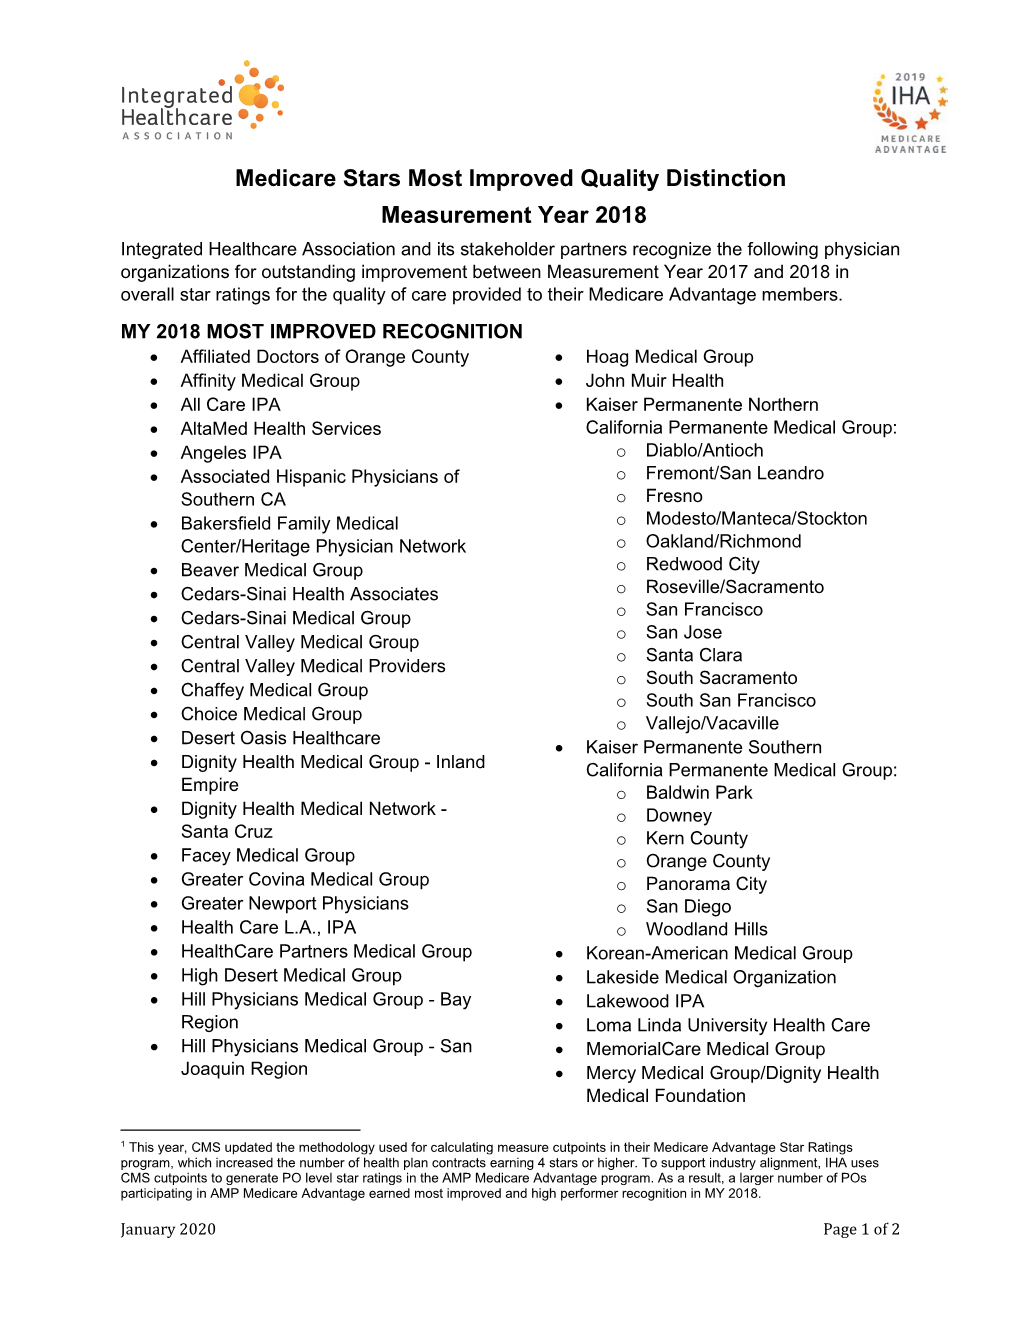 Medicare Stars Most Improved Quality Distinction Measurement Year 2018